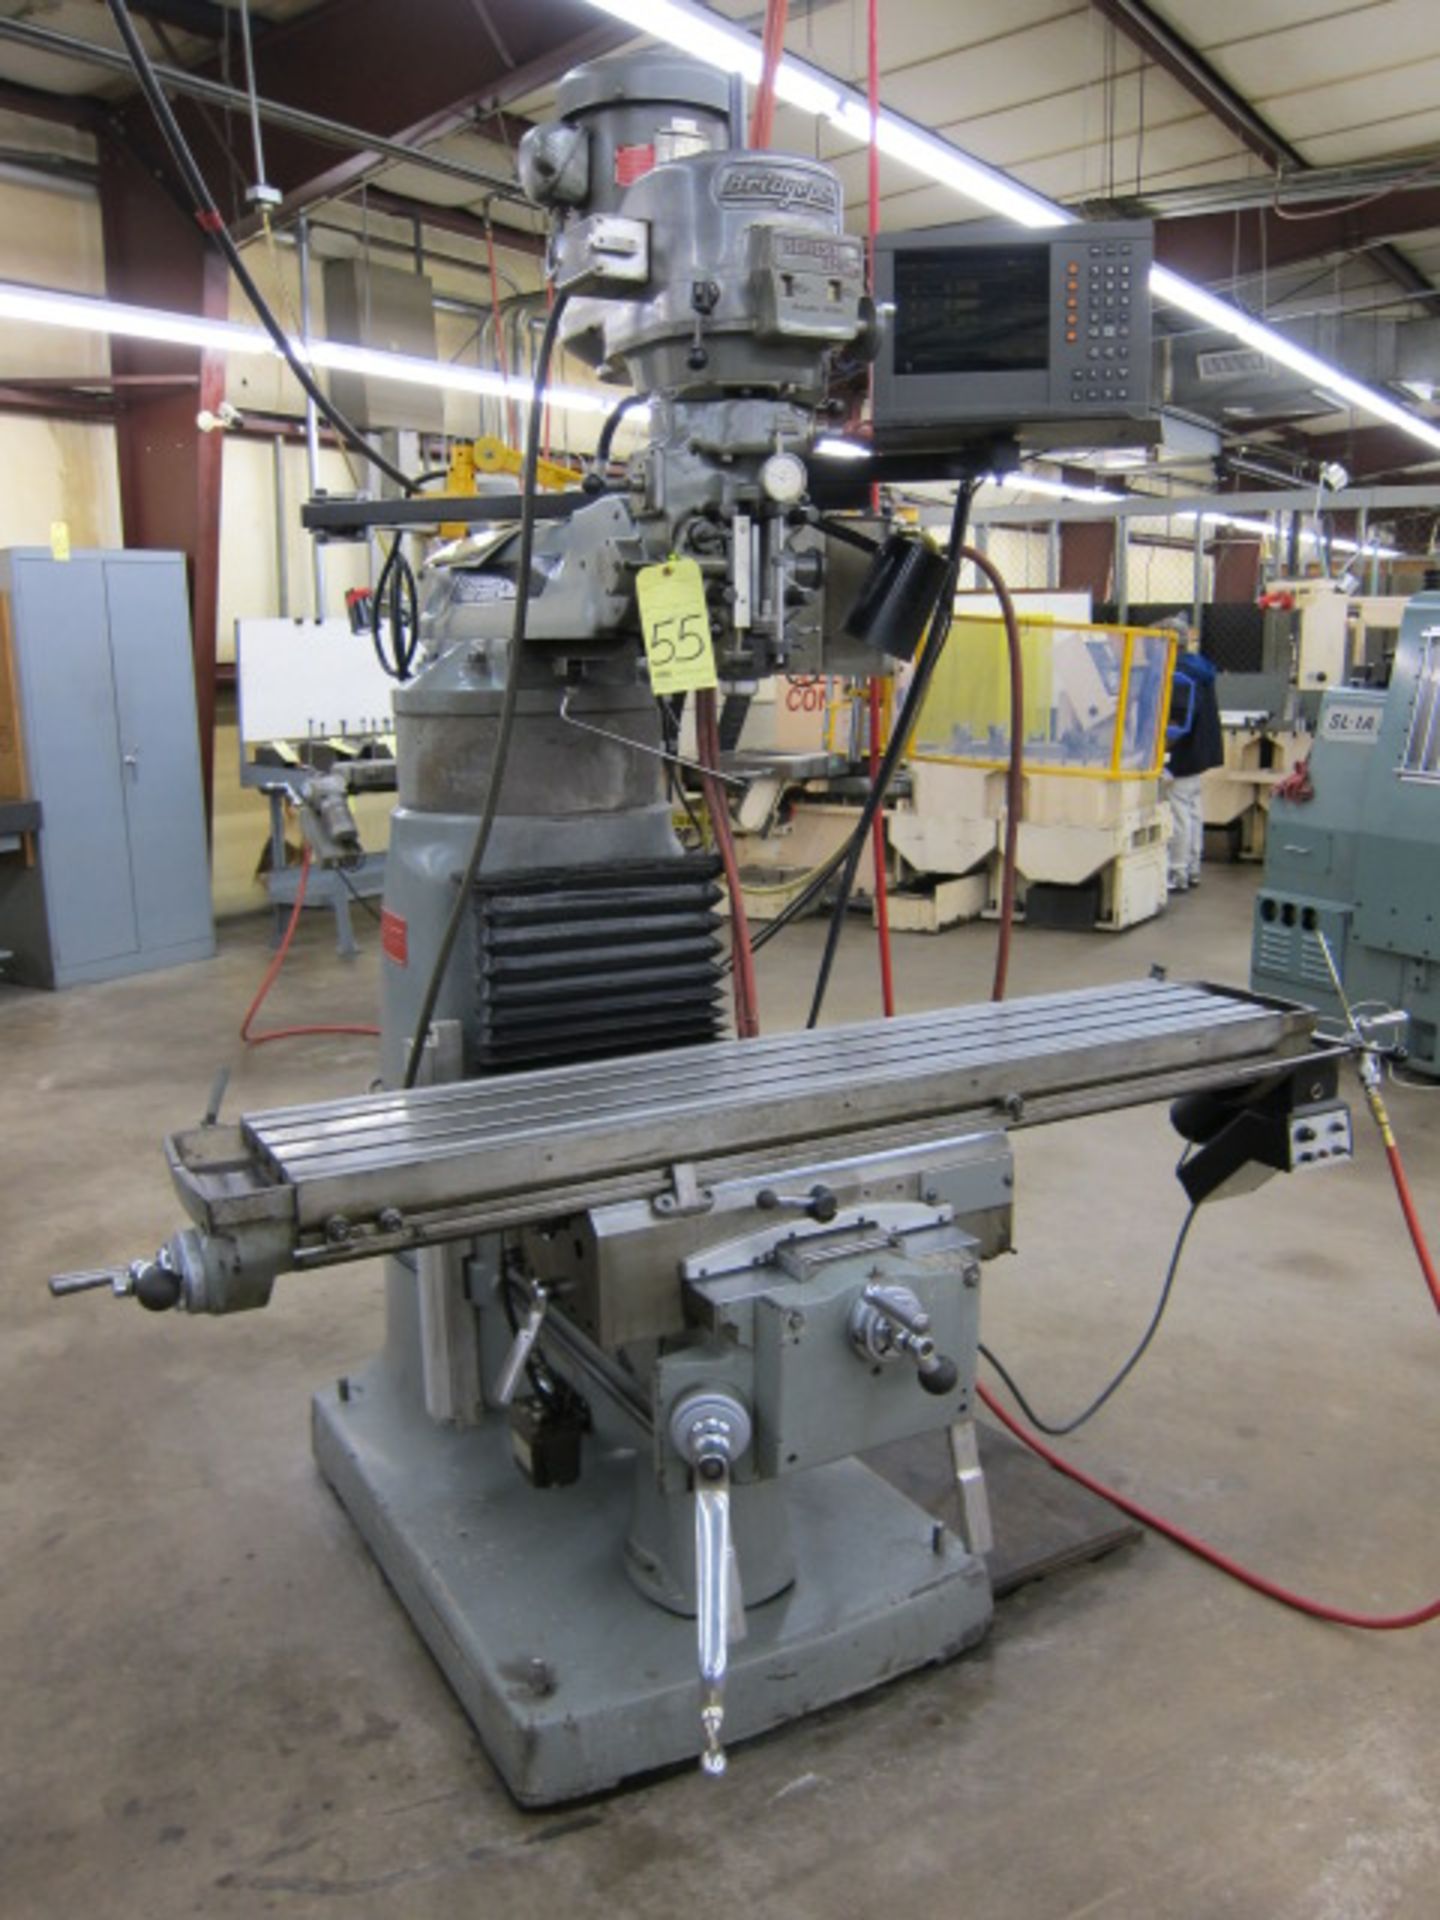 VERTICAL TURRET MILL, BRIDGEPORT SERIES II SPECIAL, 11” x 58” table, pwr. feeds, 2 HP variable